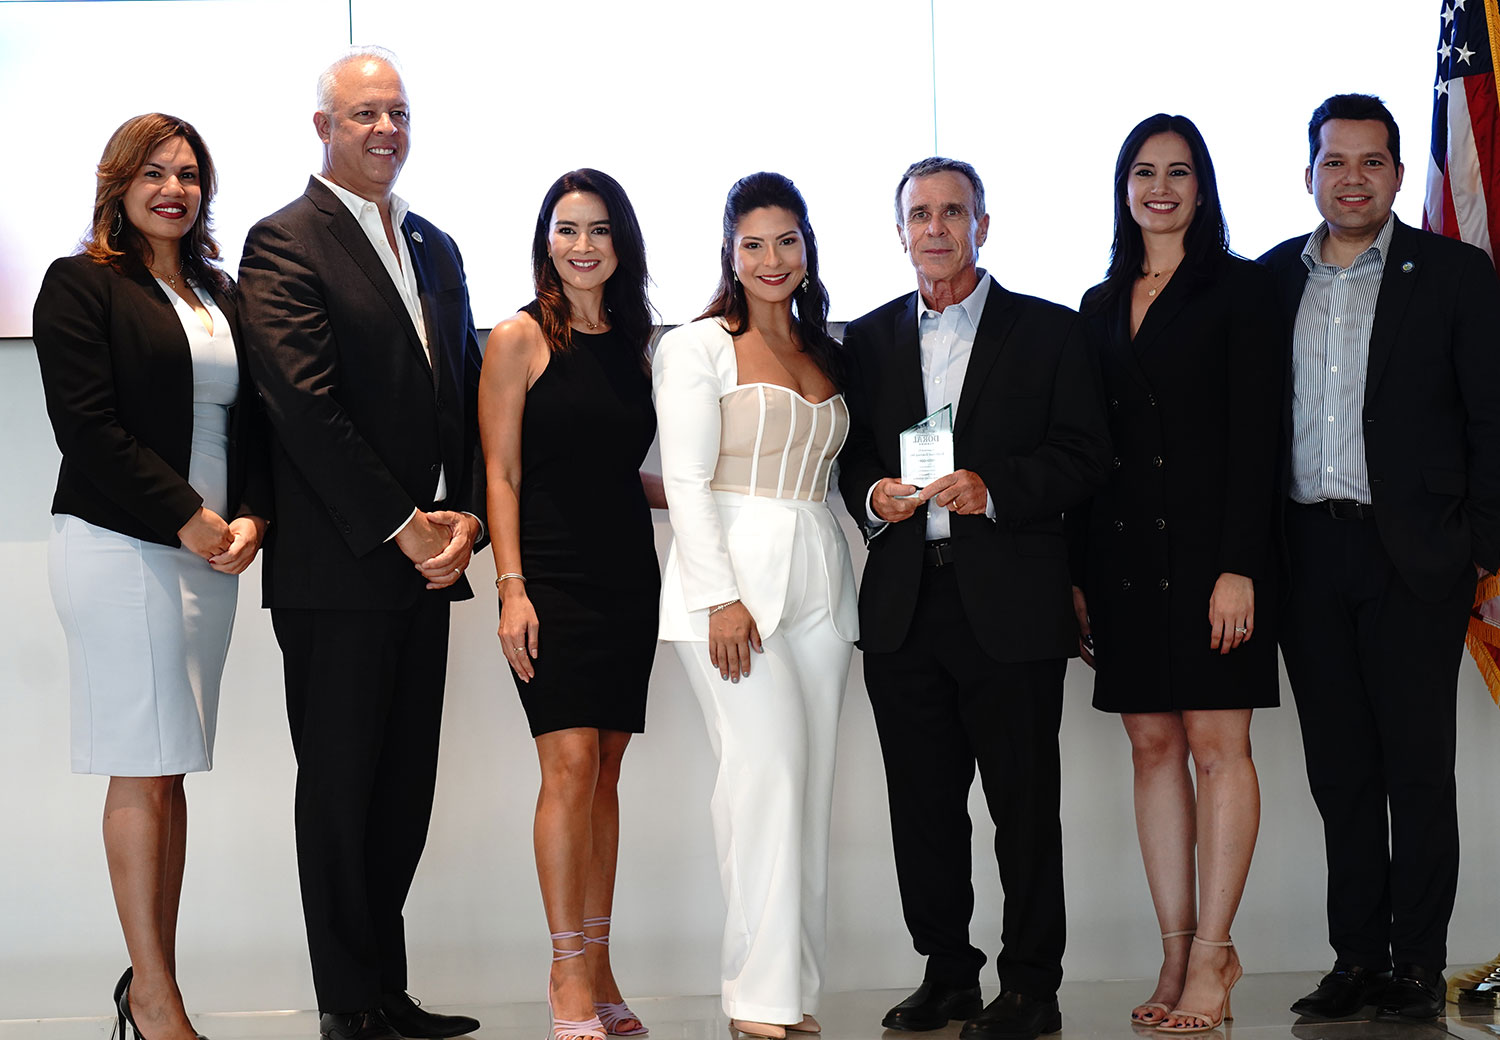 Doral Honors 20 Year Businesses!